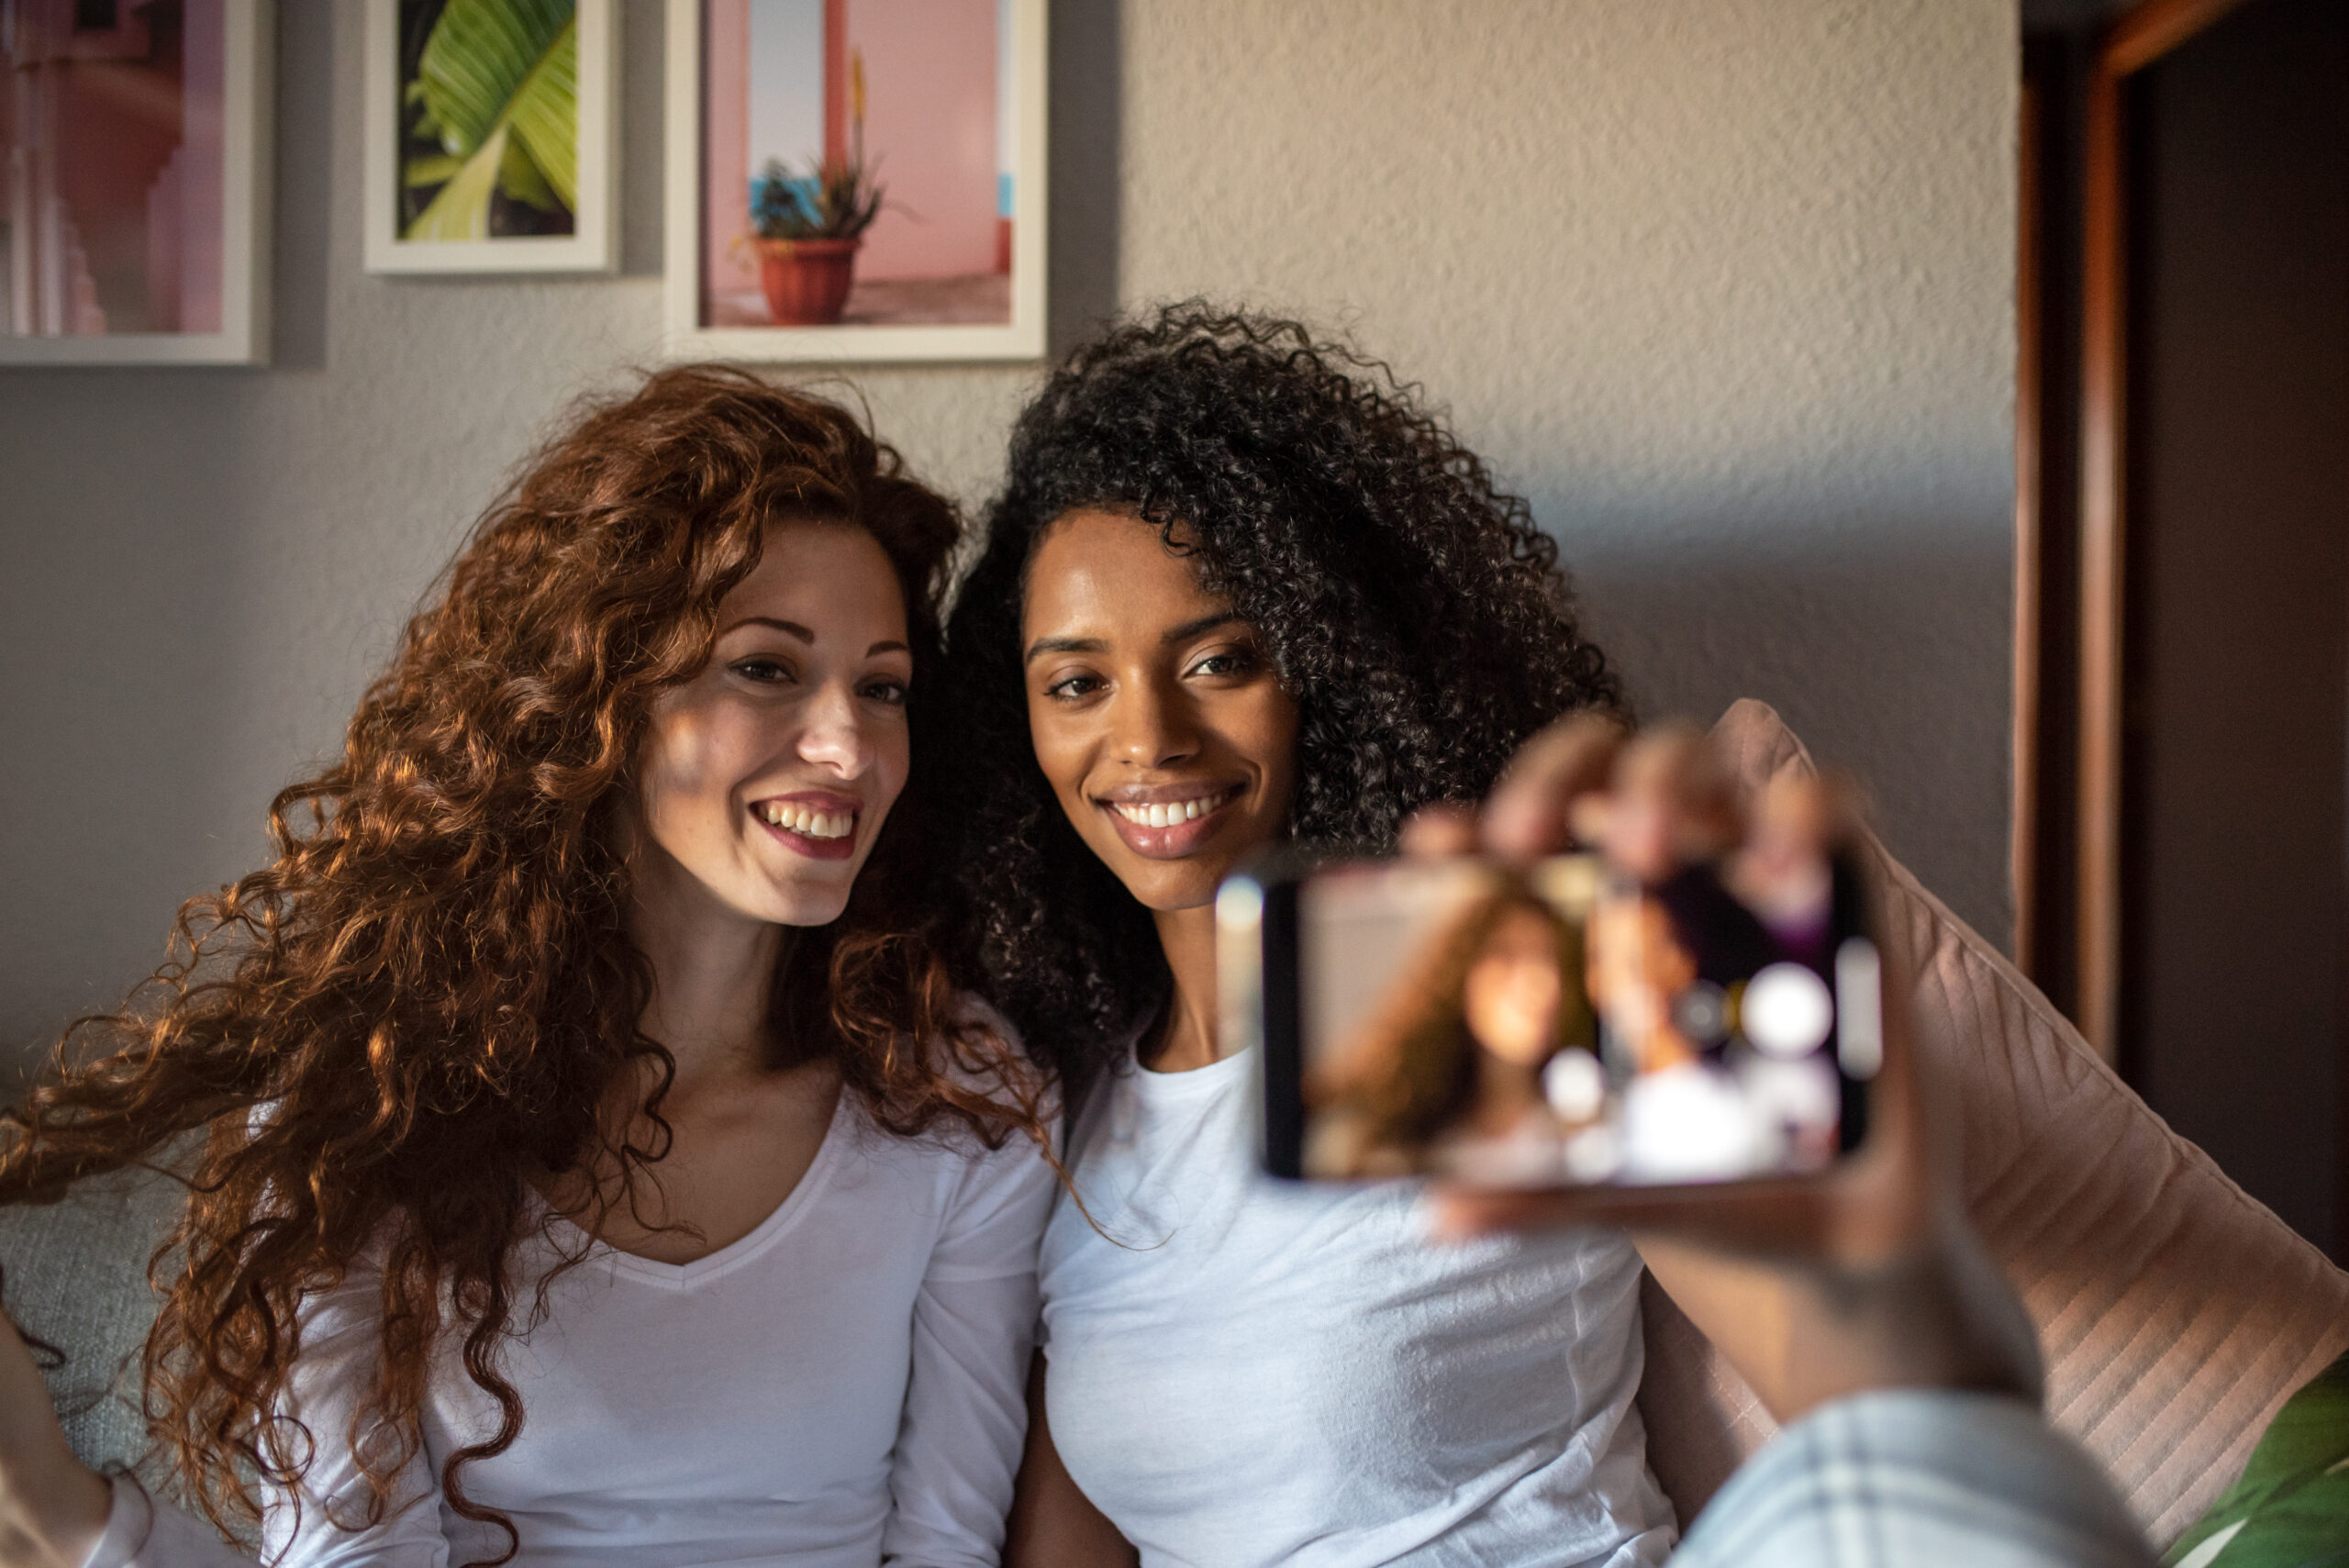 Young cheerful women friends seating relaxed on the sofa with mobile phone taking a selfie